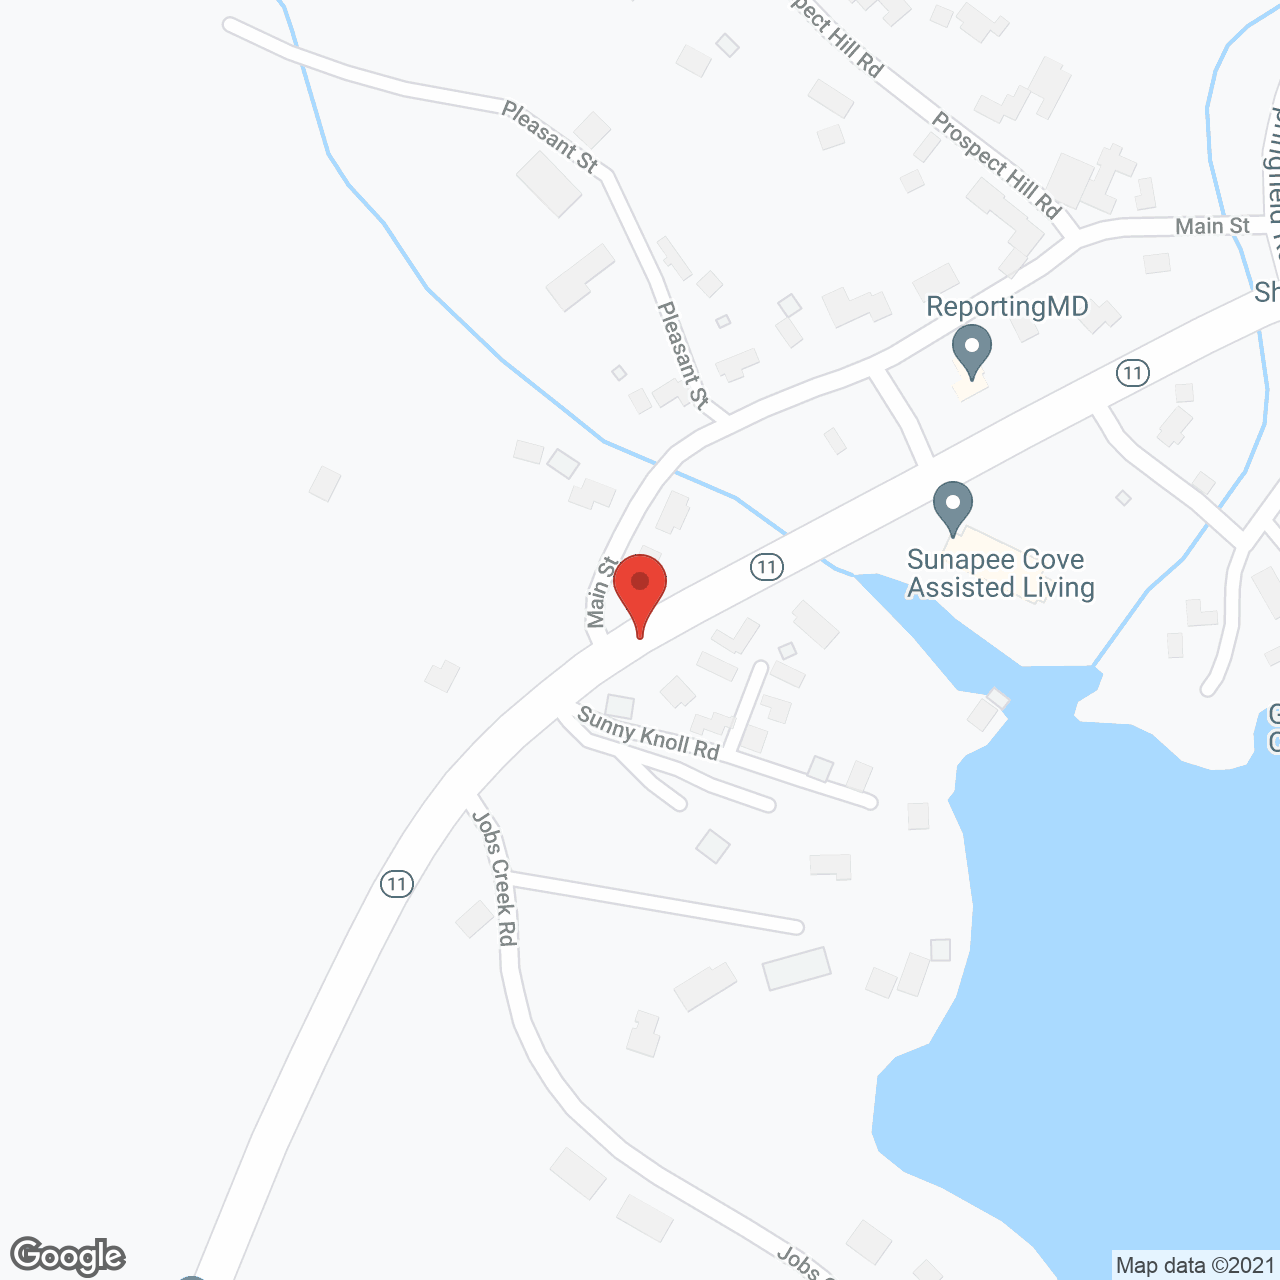 Sunapee Cove Assisted  Living in google map